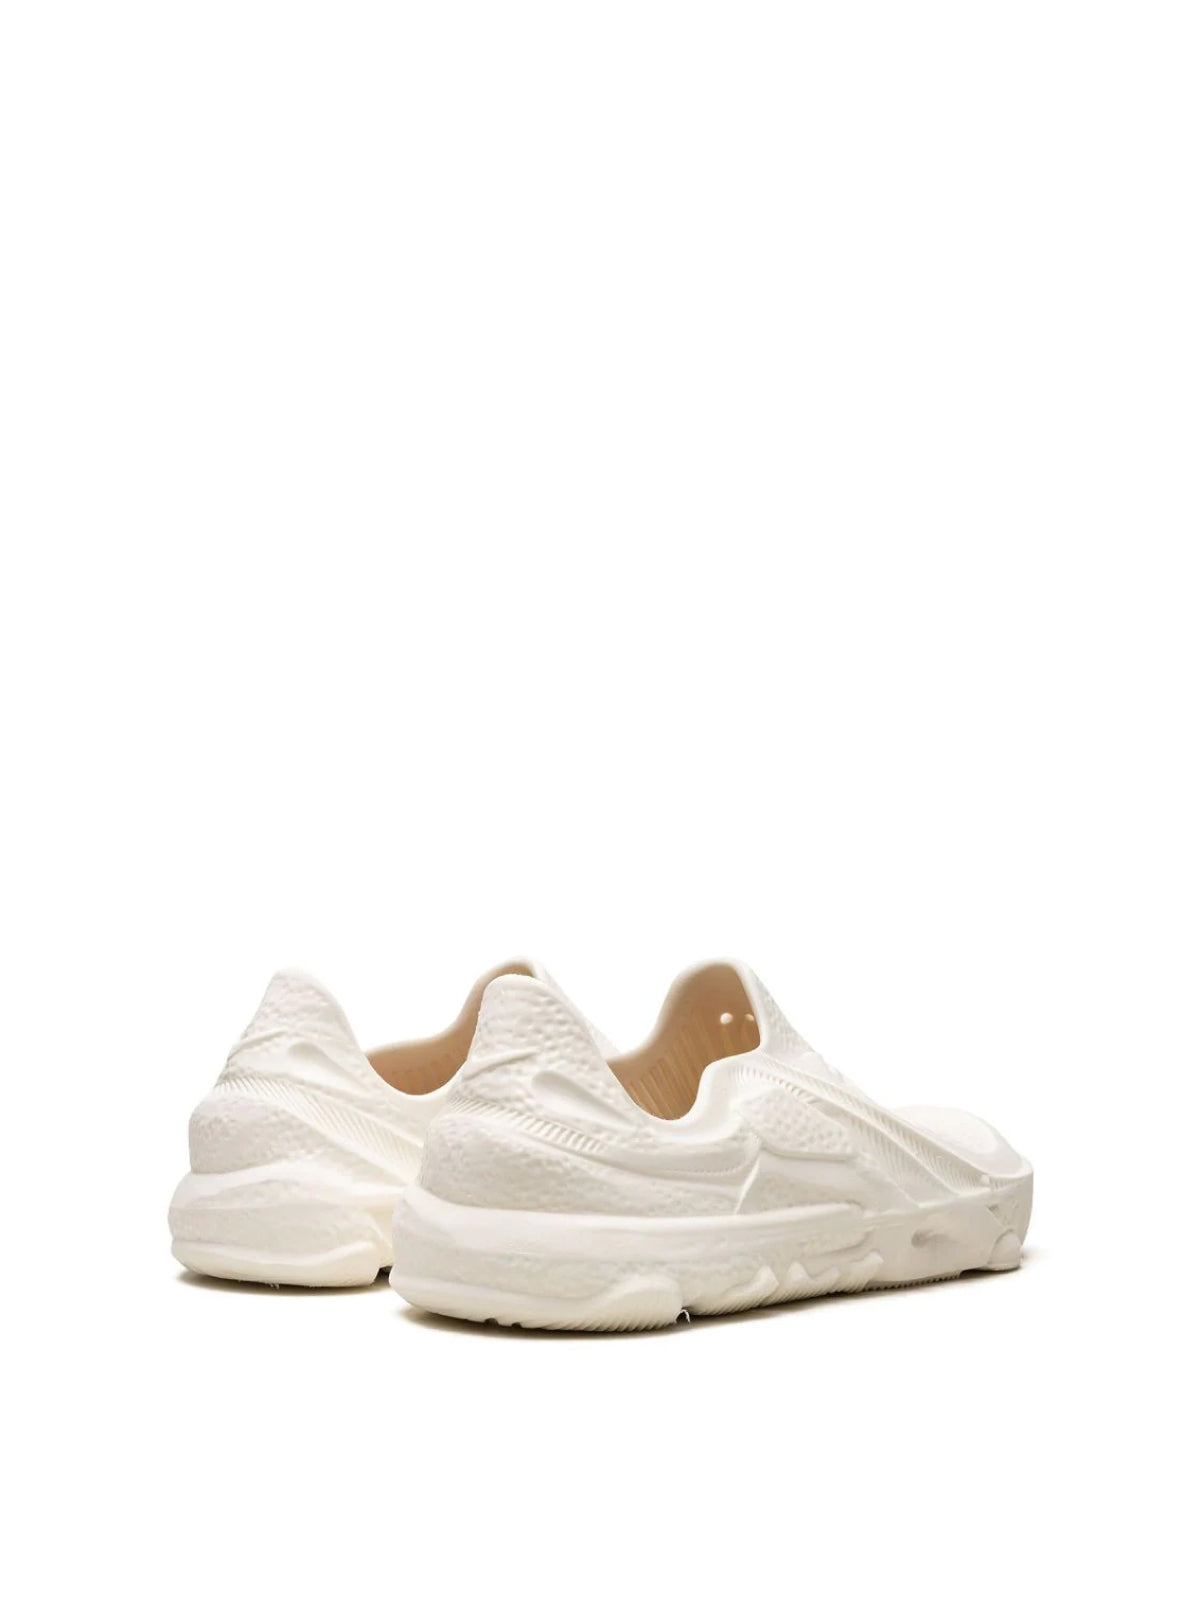 Nike-OUTLET-SALE-ISPA Universal Natural Sneakers-ARCHIVIST